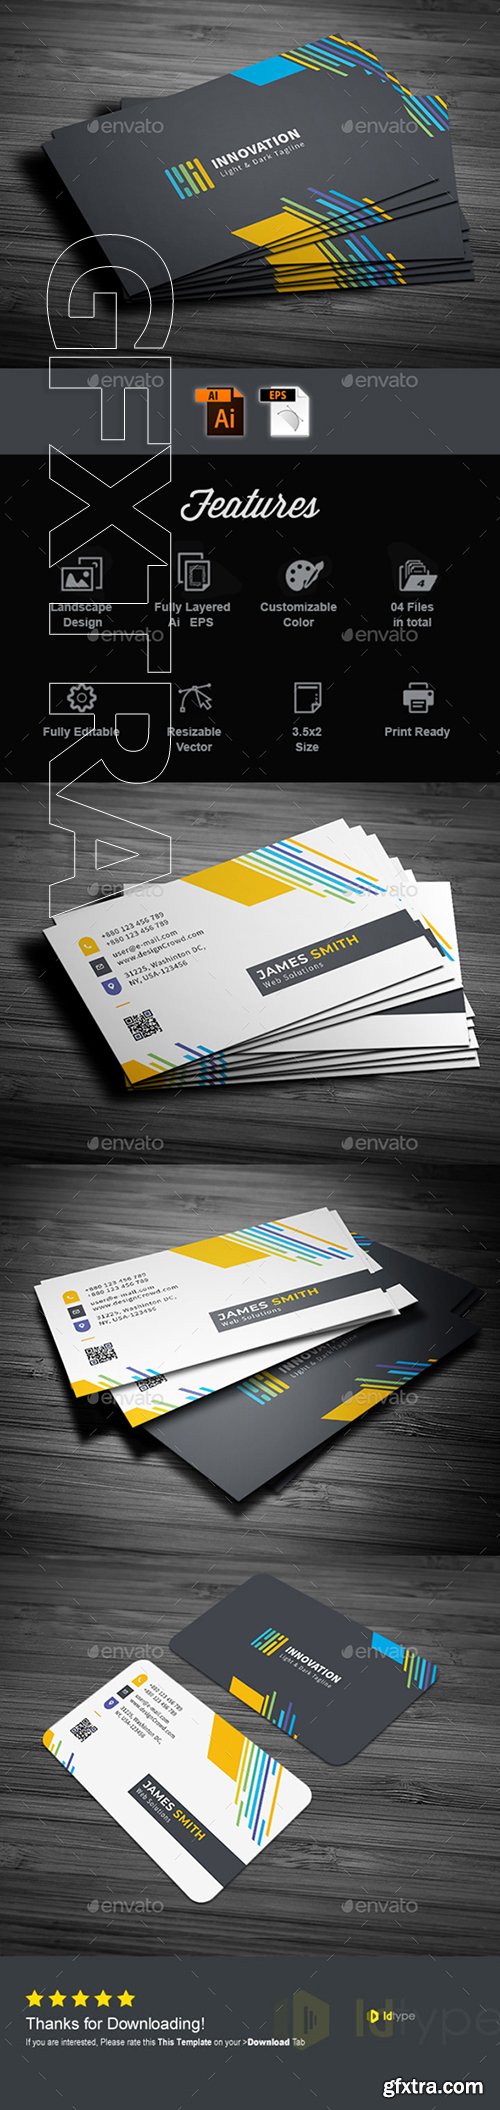 GraphicRiver - Business Card 22604474